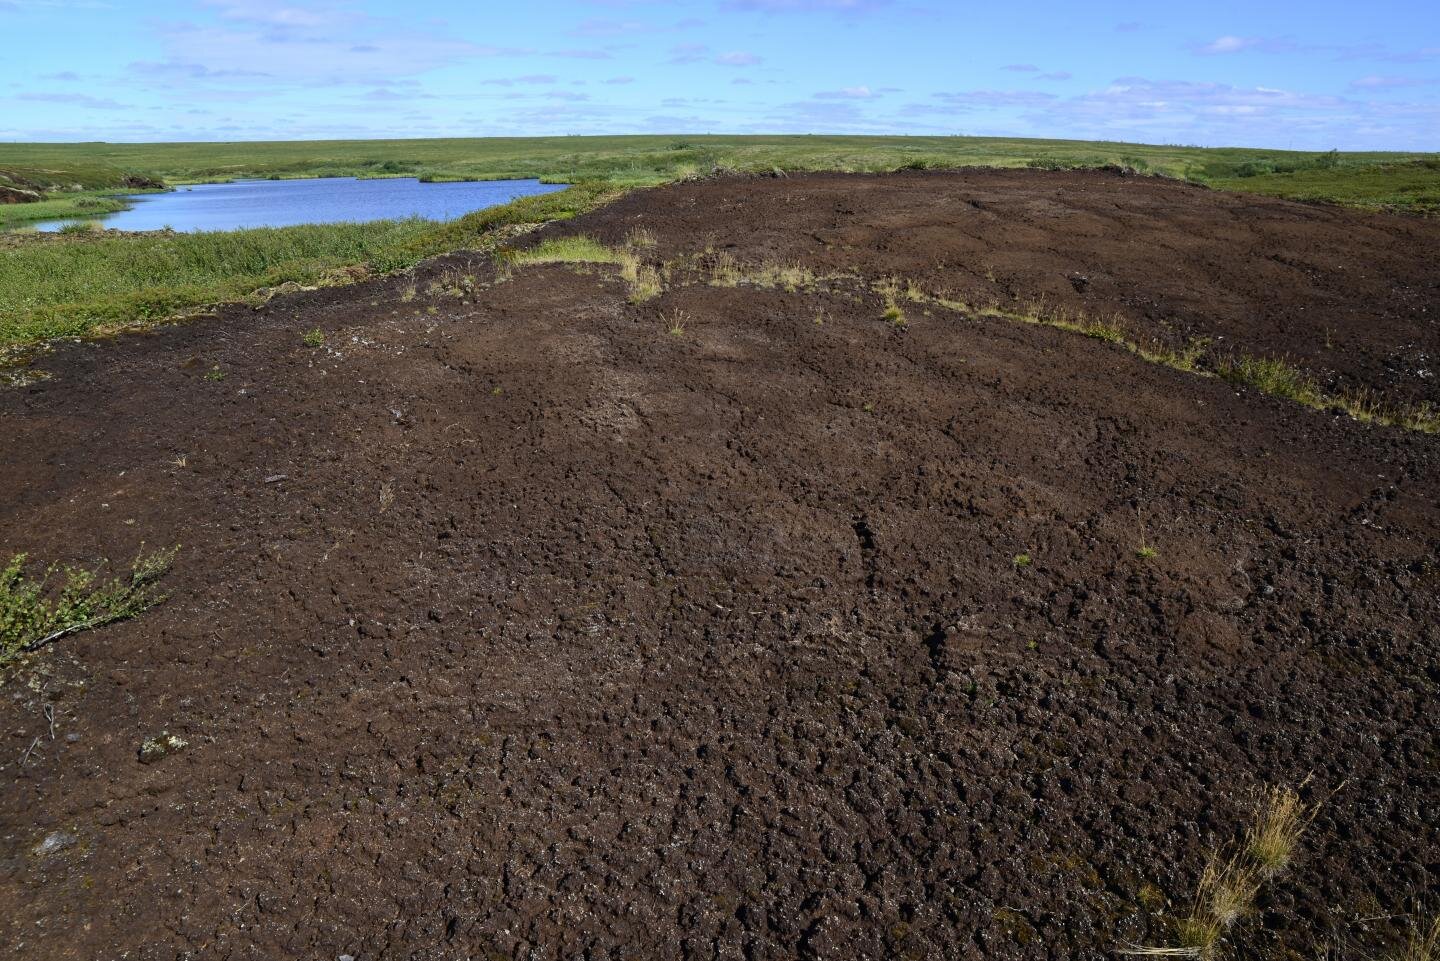 Historical climate effects of permafrost peatland surprise researchers